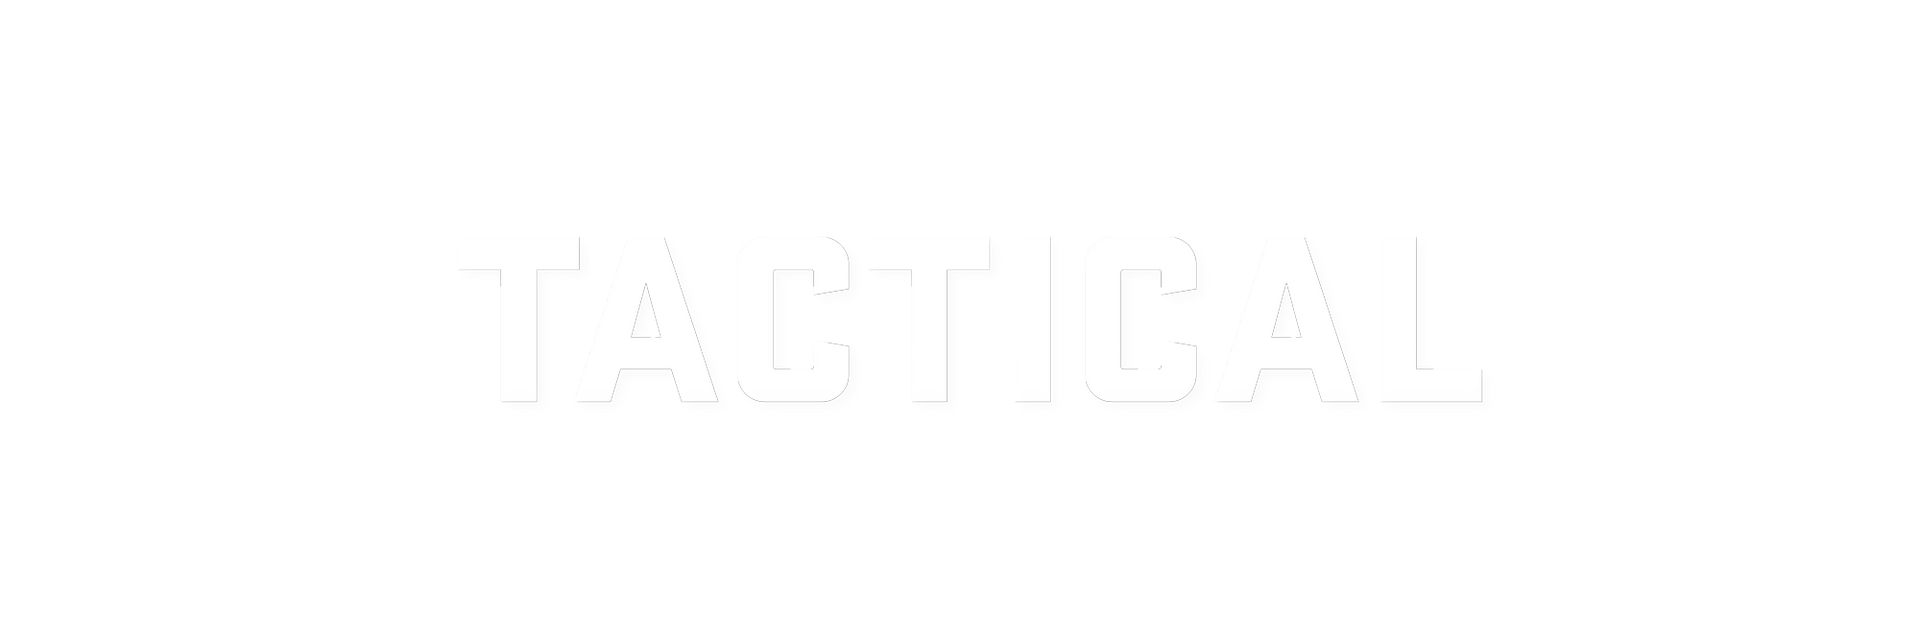 Tactical  Header Image Text Overlay